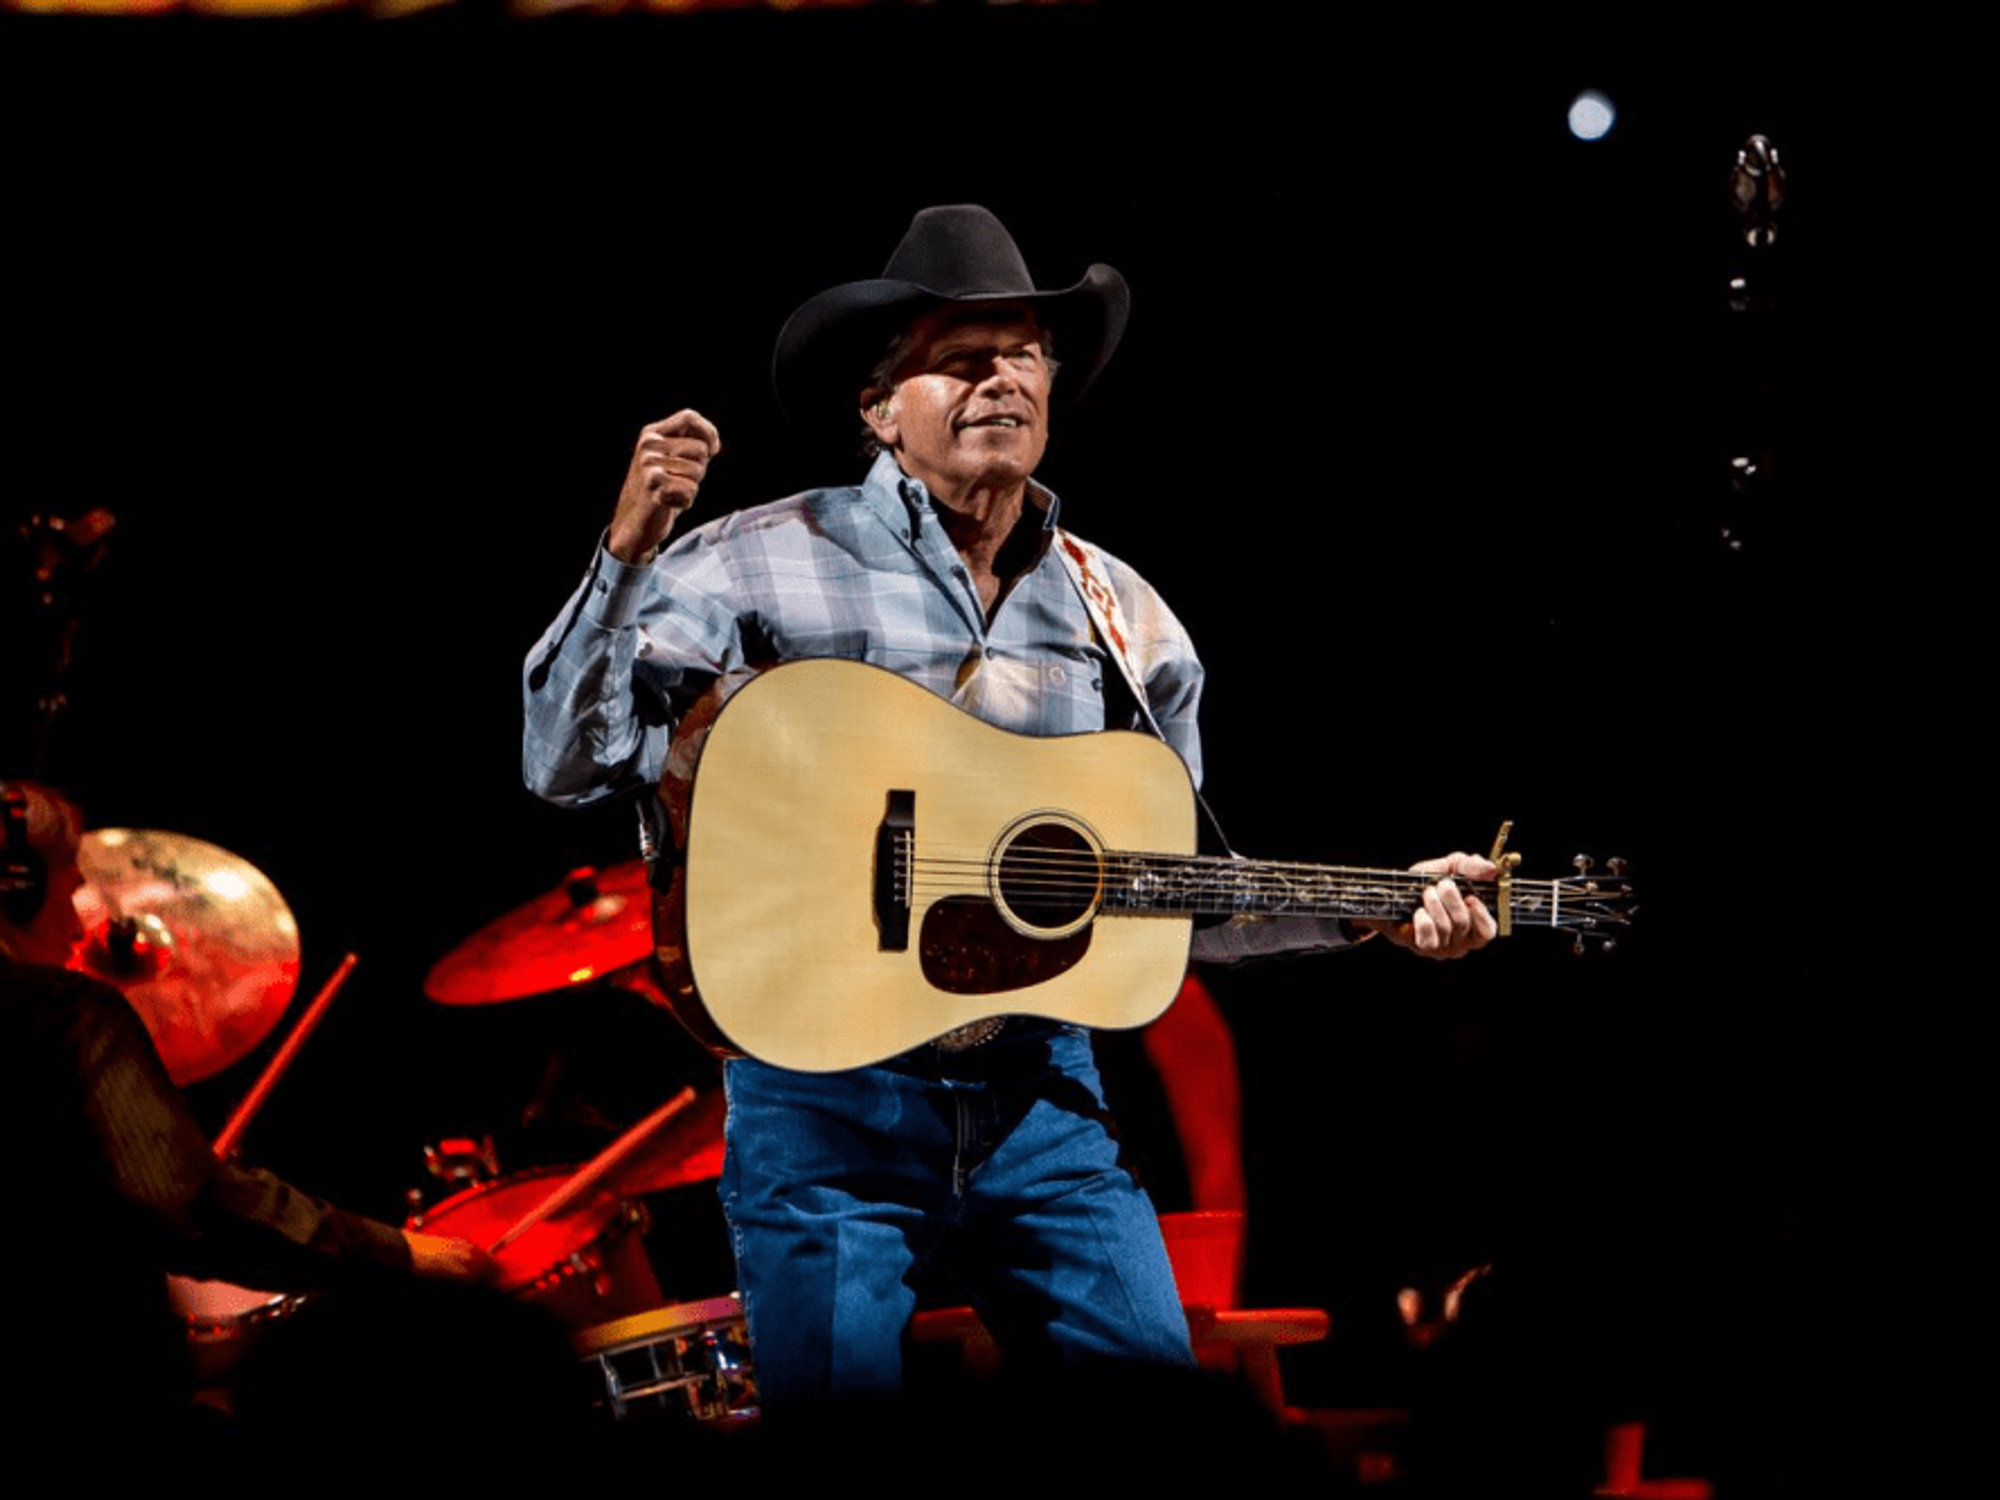 George Strait will close out RodeoHouston 2019 on March 17.